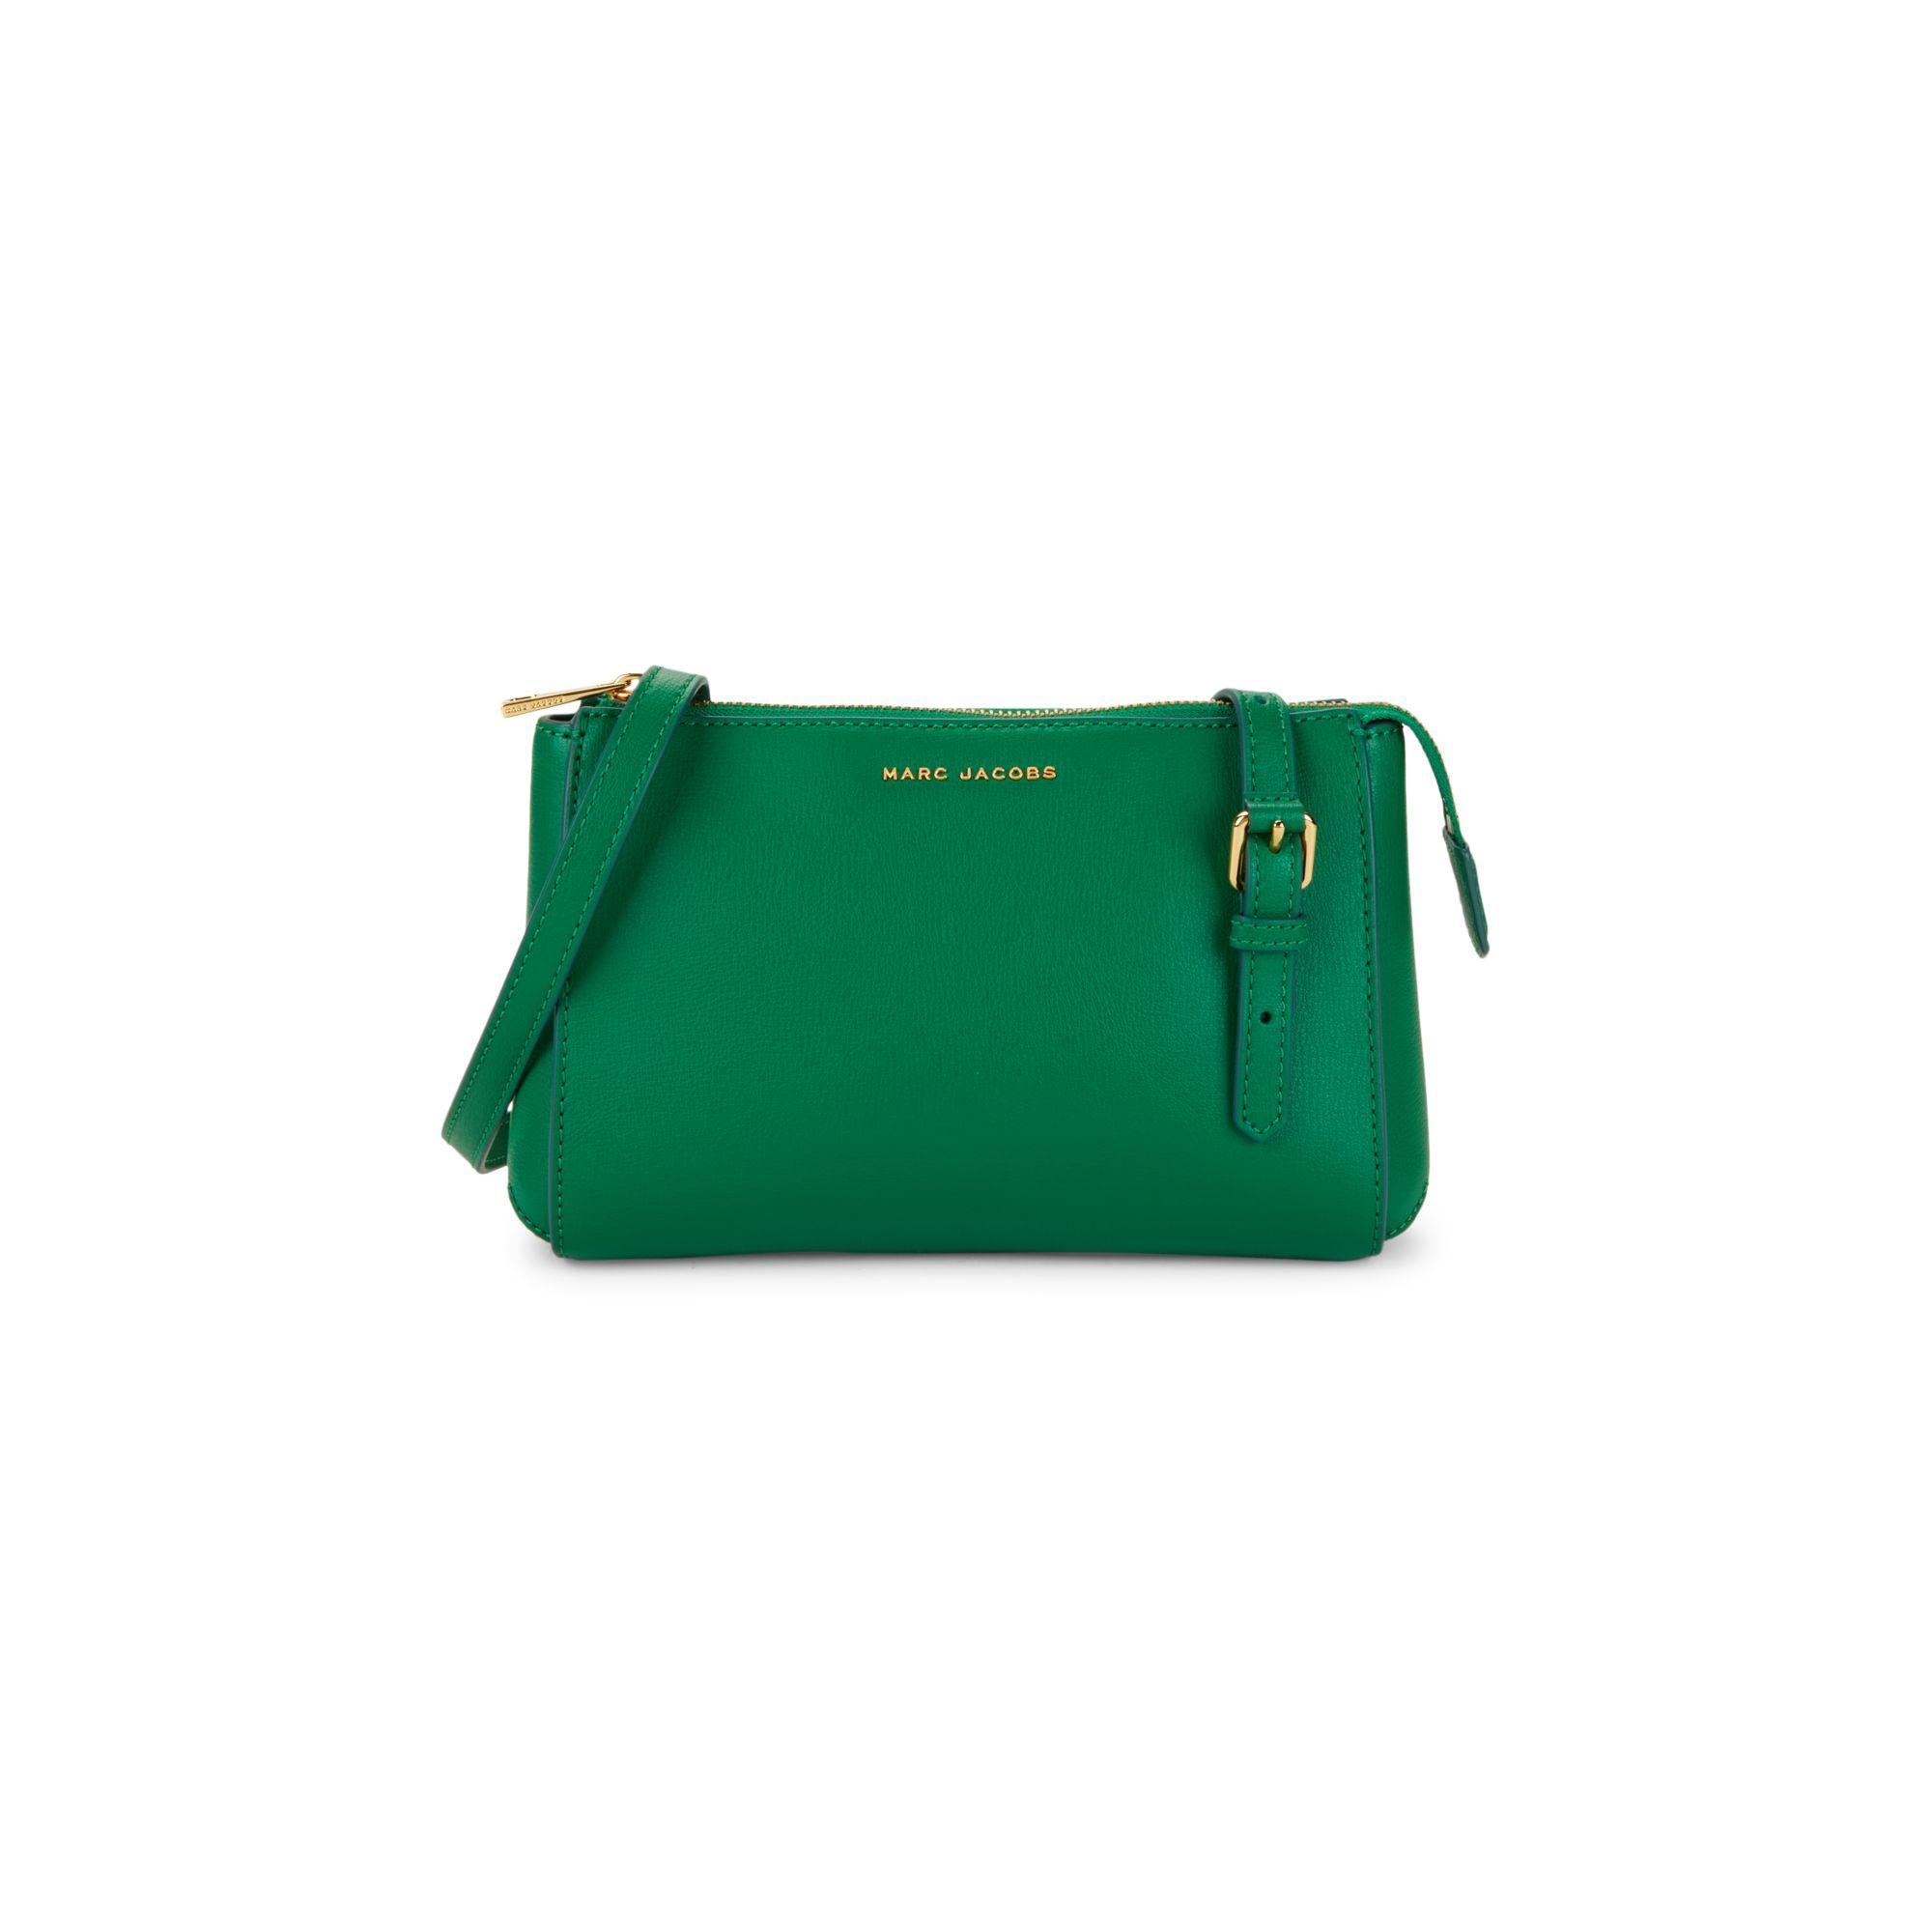 Marc Jacobs Pepper Leather Crossbody Bag in Green